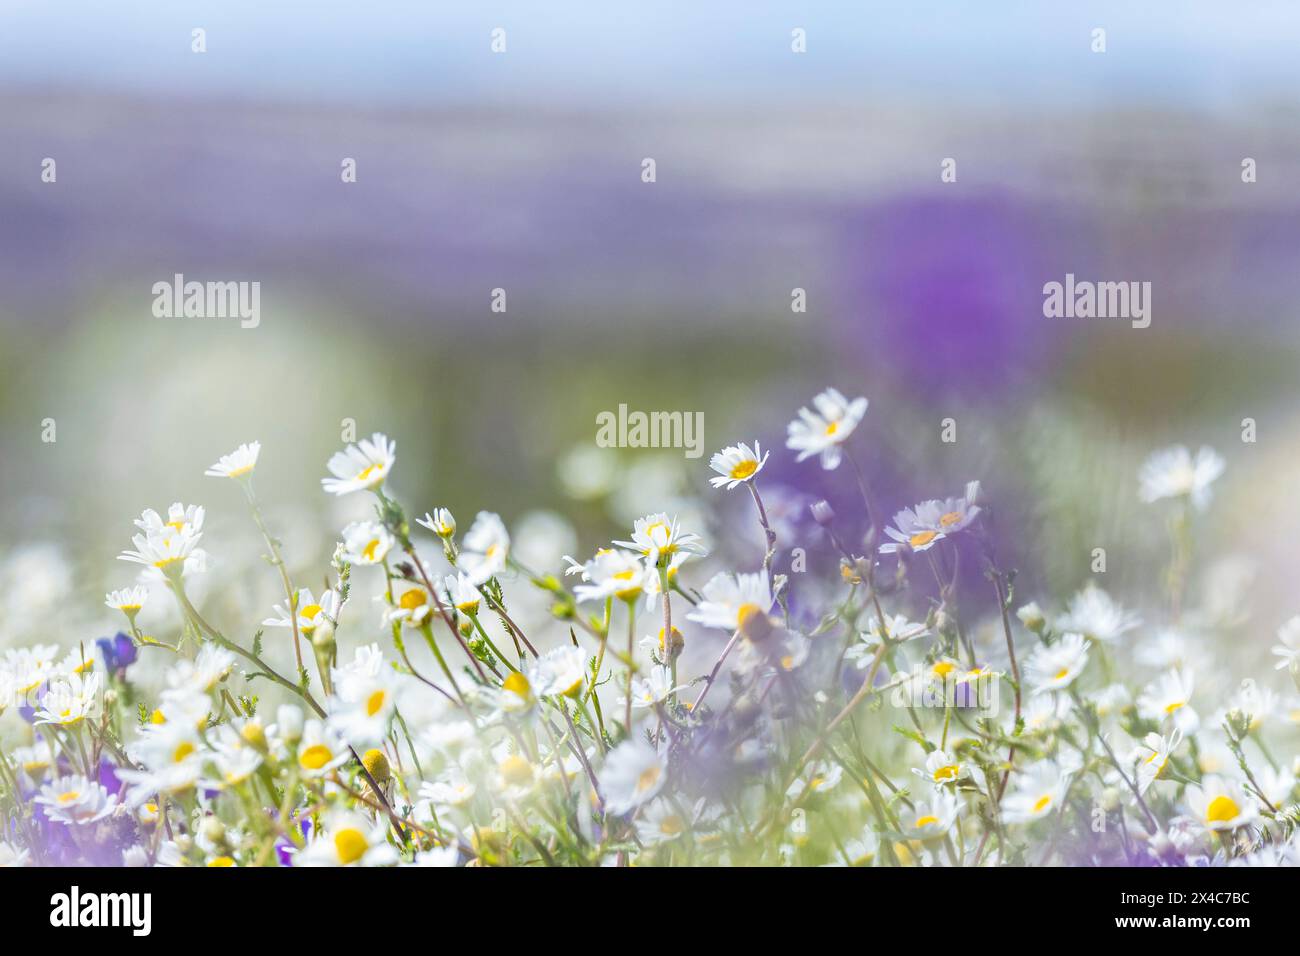 Portugal, Evora. Field of white daisies and purple sage. Stock Photo